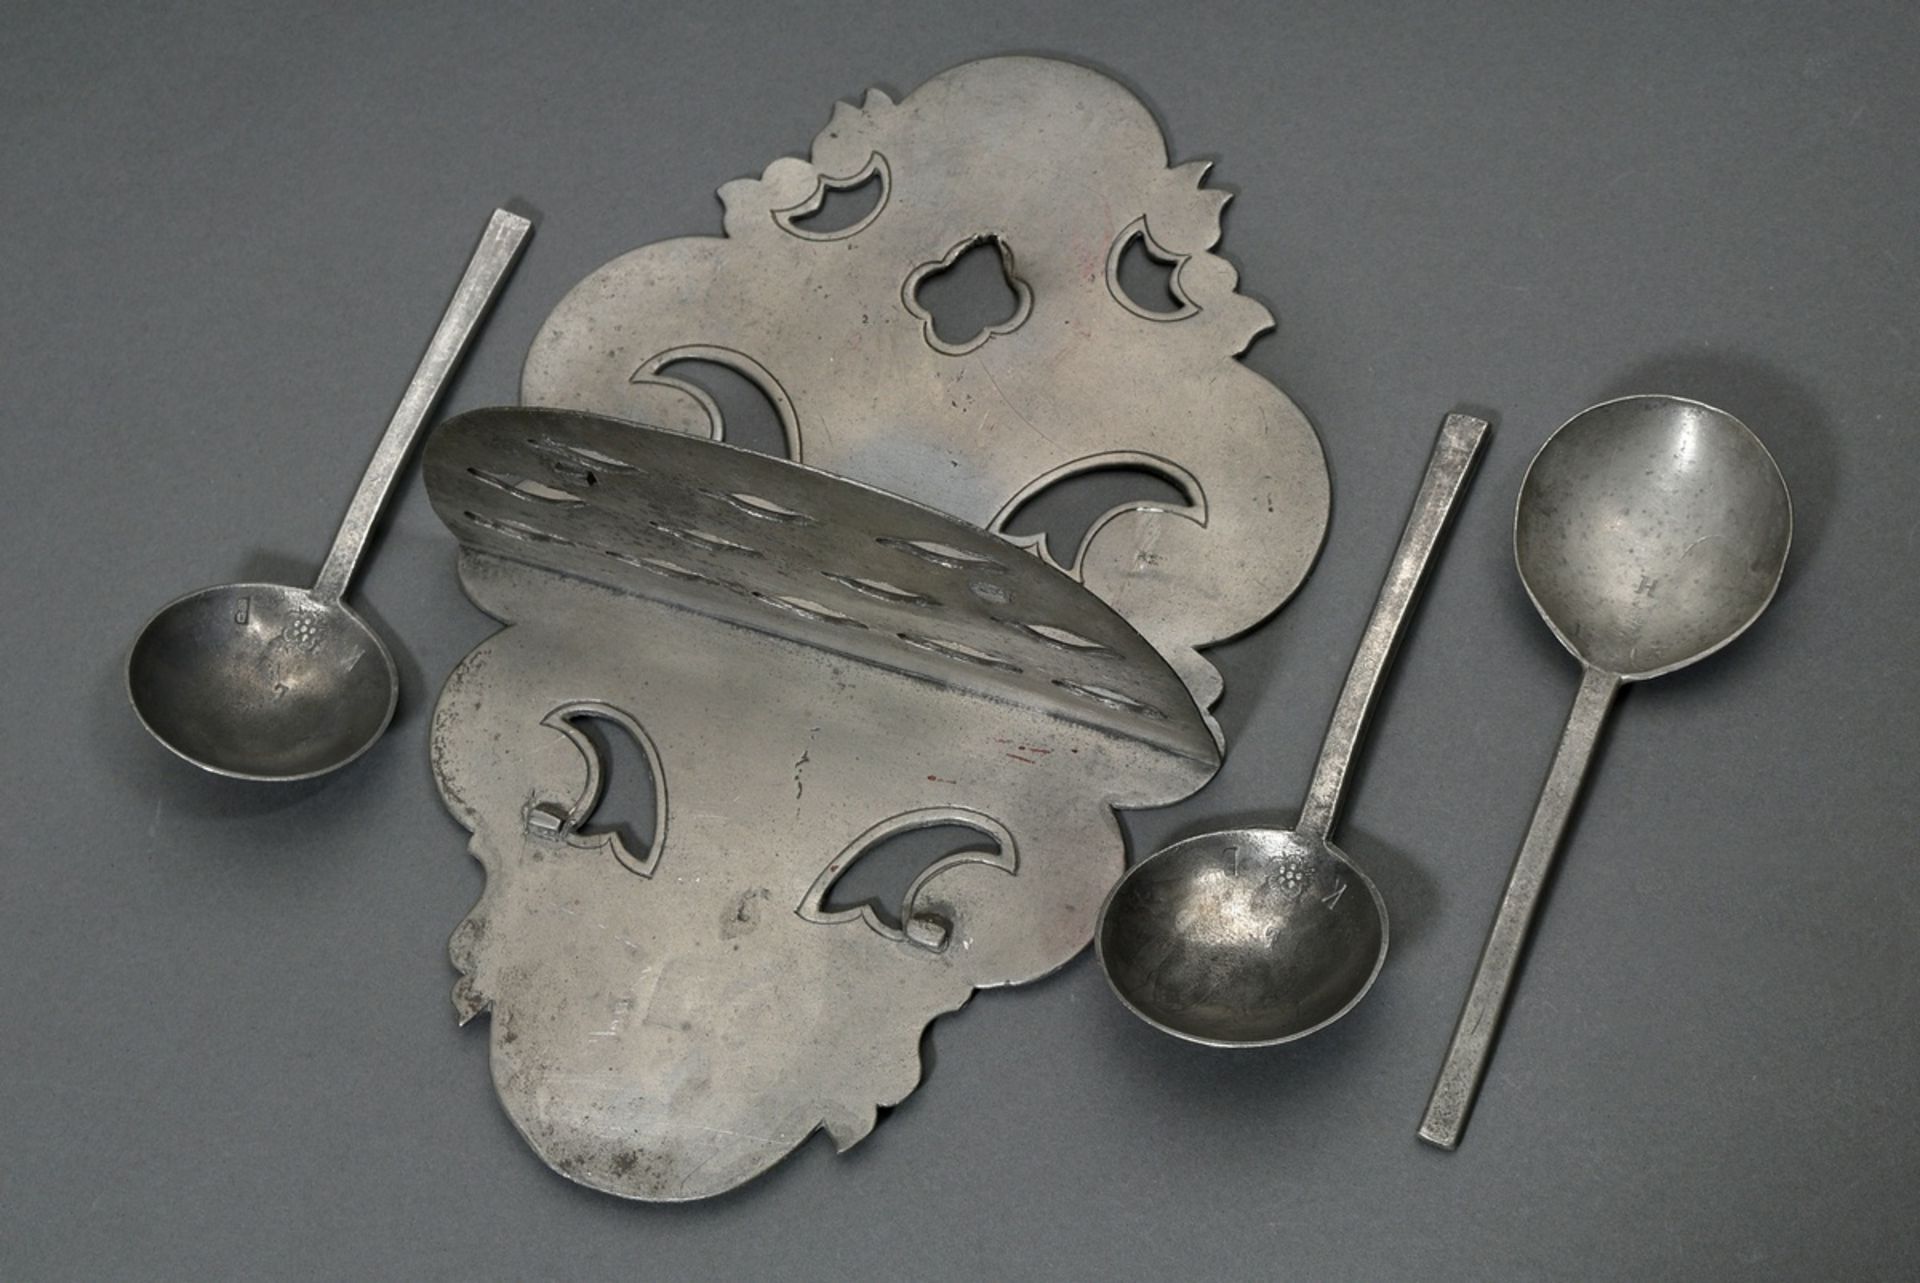 Pewter spoon board in openwork shield form with 12 slots, MZ indistinct, end of 18th century, 31x20 - Image 3 of 6